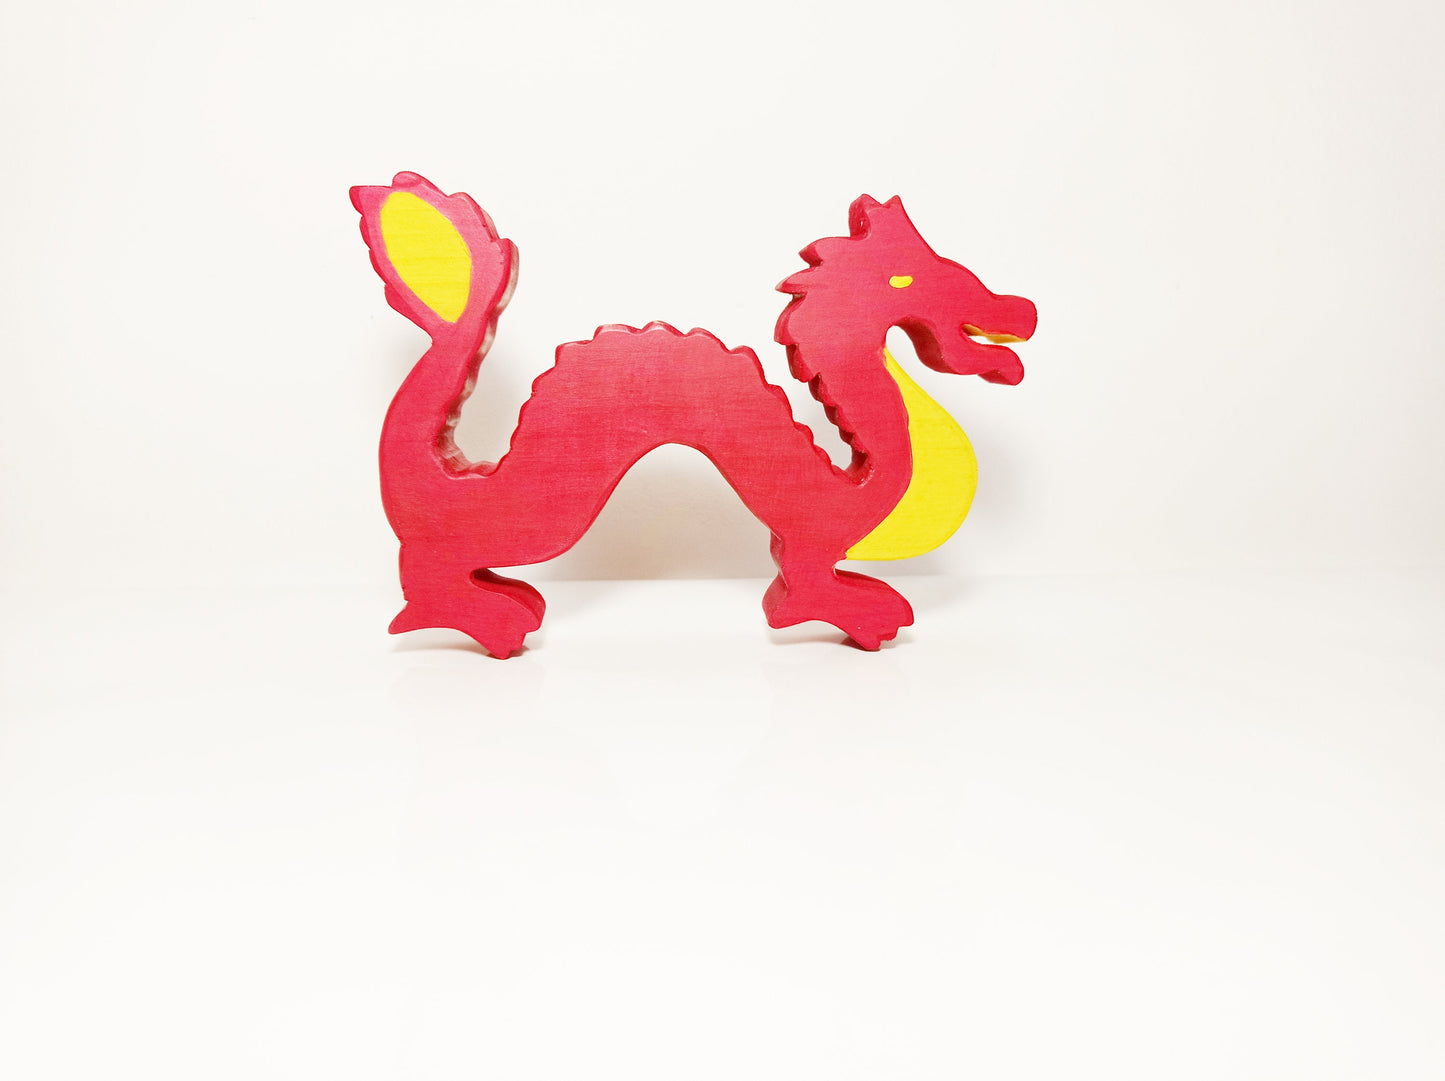 Red dragon wooden toy, waldorf inspired wooden toy, dragon wooden toy, wooden toy, gift for kids, handmade wooden toy, waldorf inspired